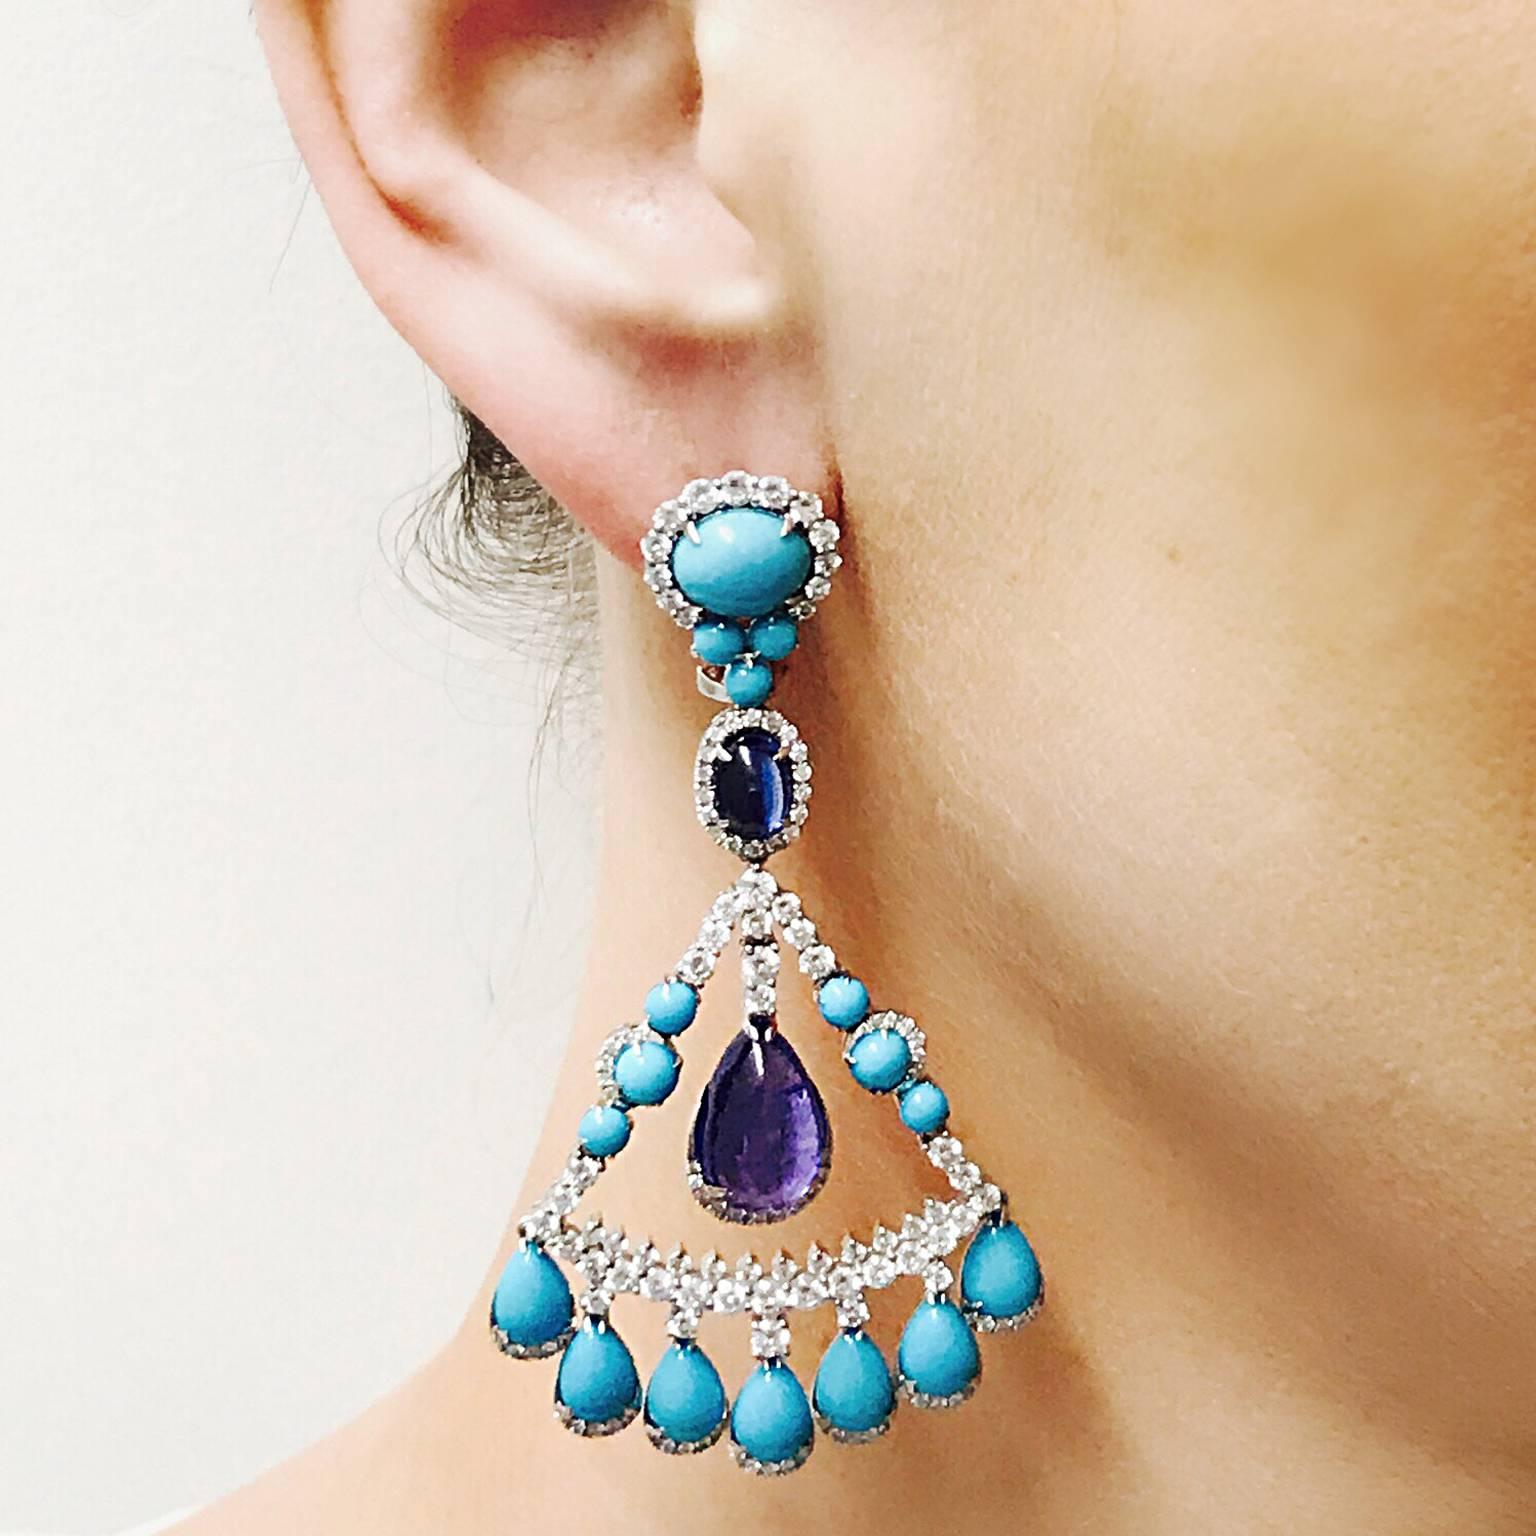 This fun and flirty Natural Turquoise earring is a great addition to any spring or summer outfit!  The Tanzanite Pear Shape drops are approx. 9.46ct with Kyanite ovals that are approx. 2.11ct.  
Diamond - Approx. 4.38ct

65mm in length
Omega Clip /